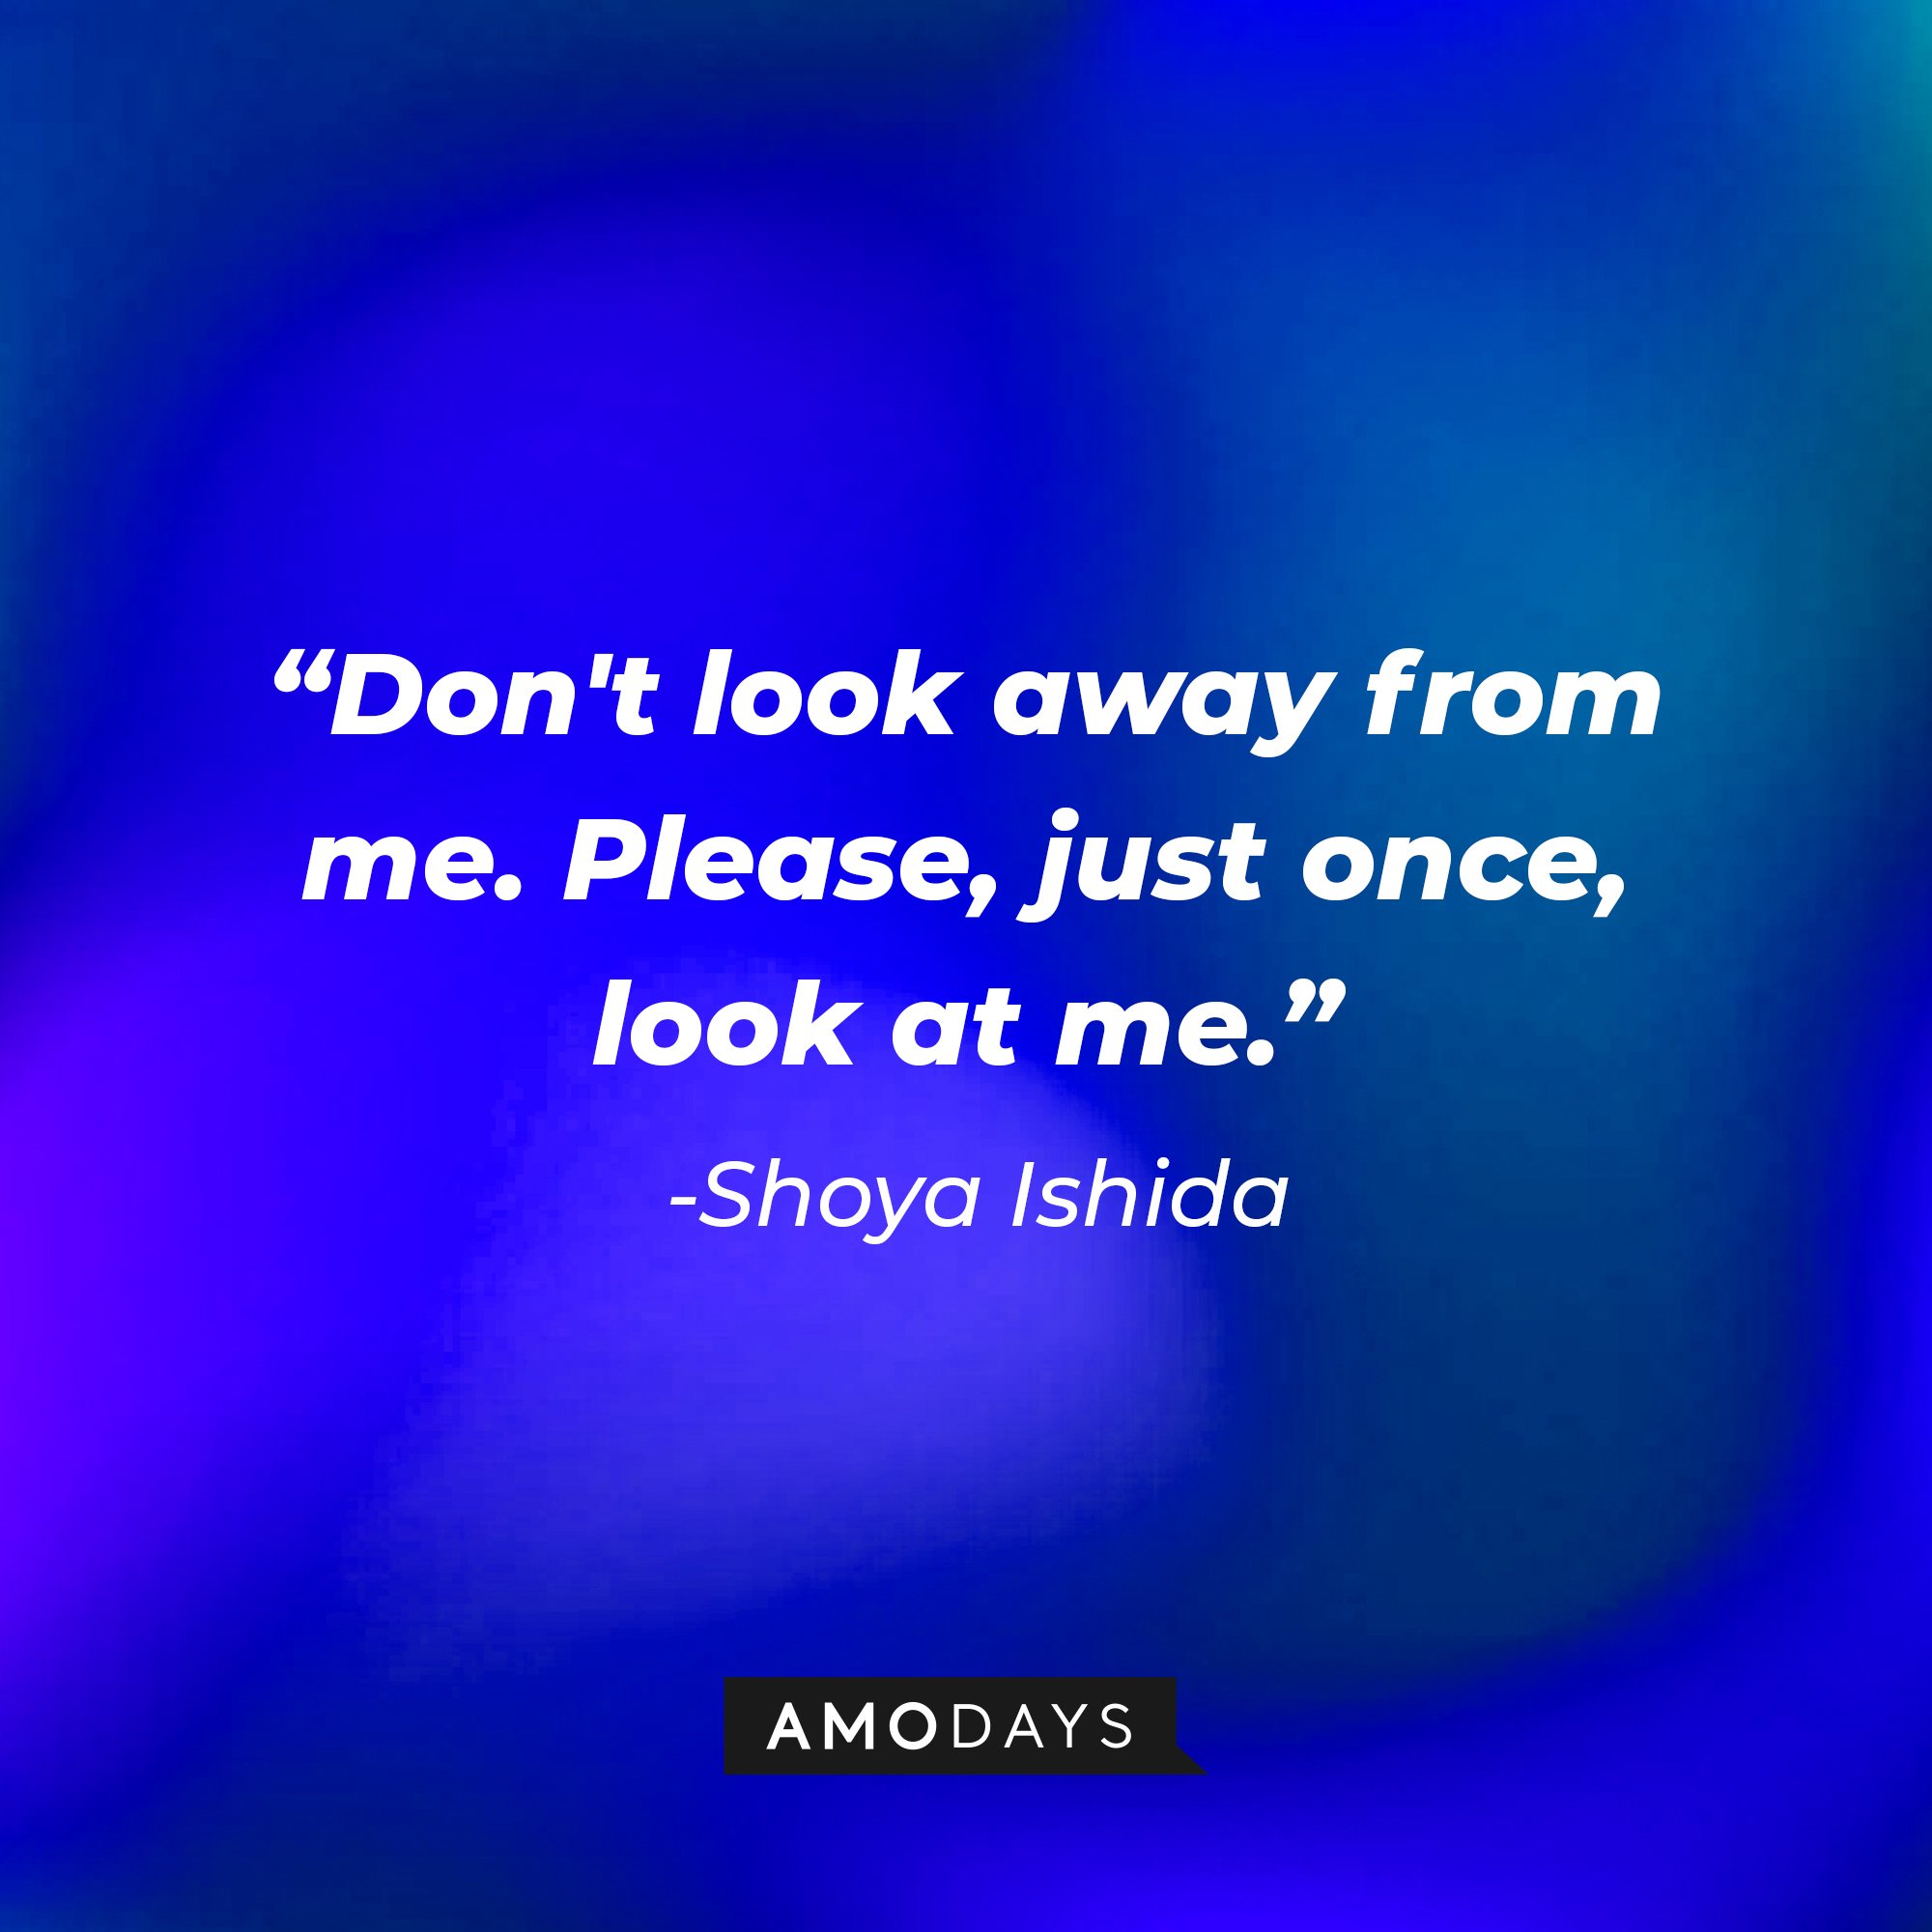 Shouya Ishida’s quote: “Don't look away from me. Please, just once, look at me." | Image: AmoDays